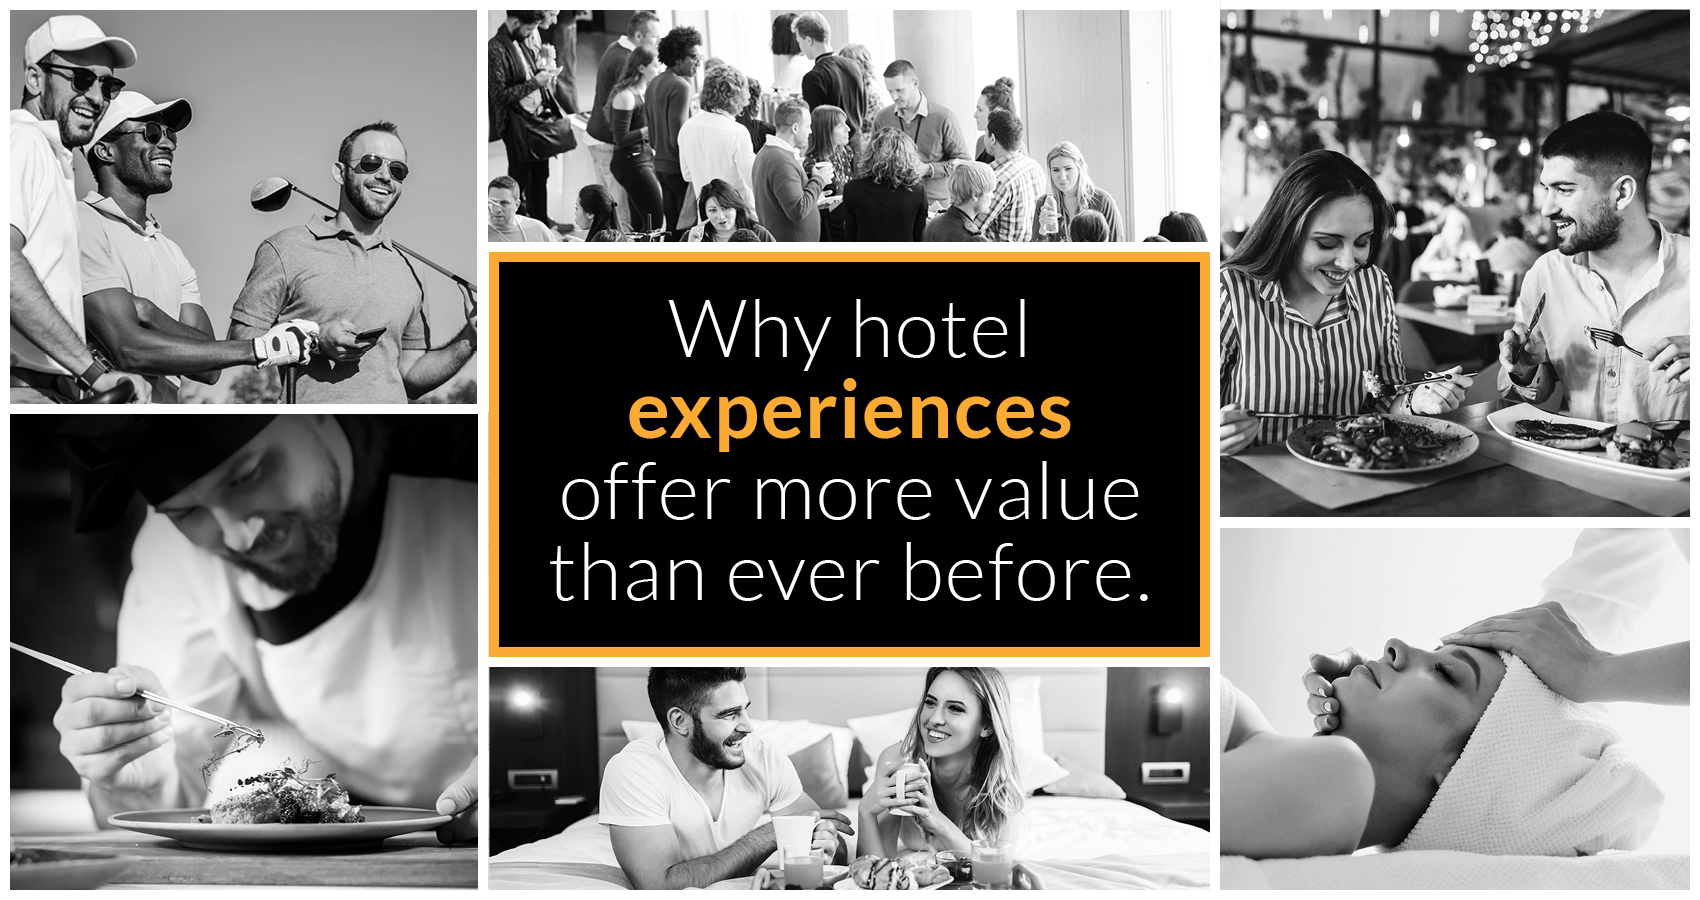 Why hotel experiences offer more value than ever before